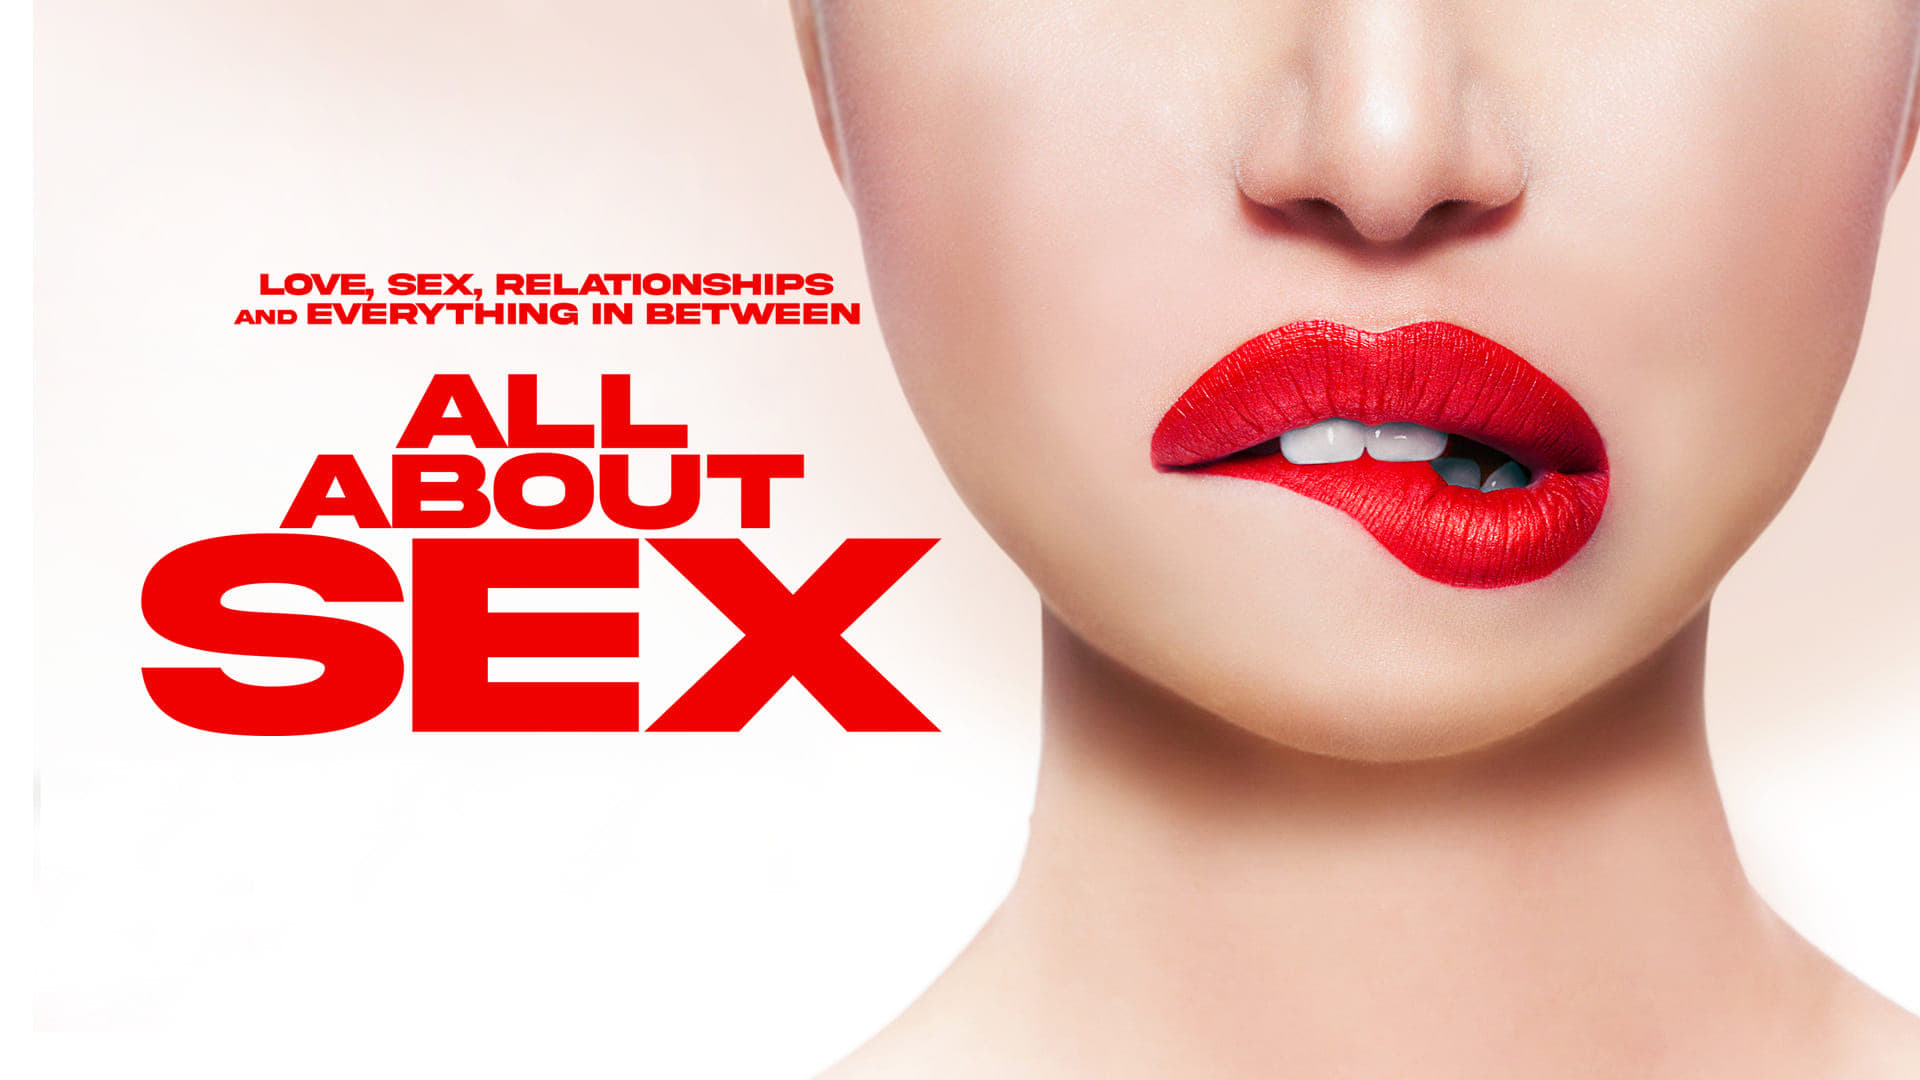 All About Sex (2020)